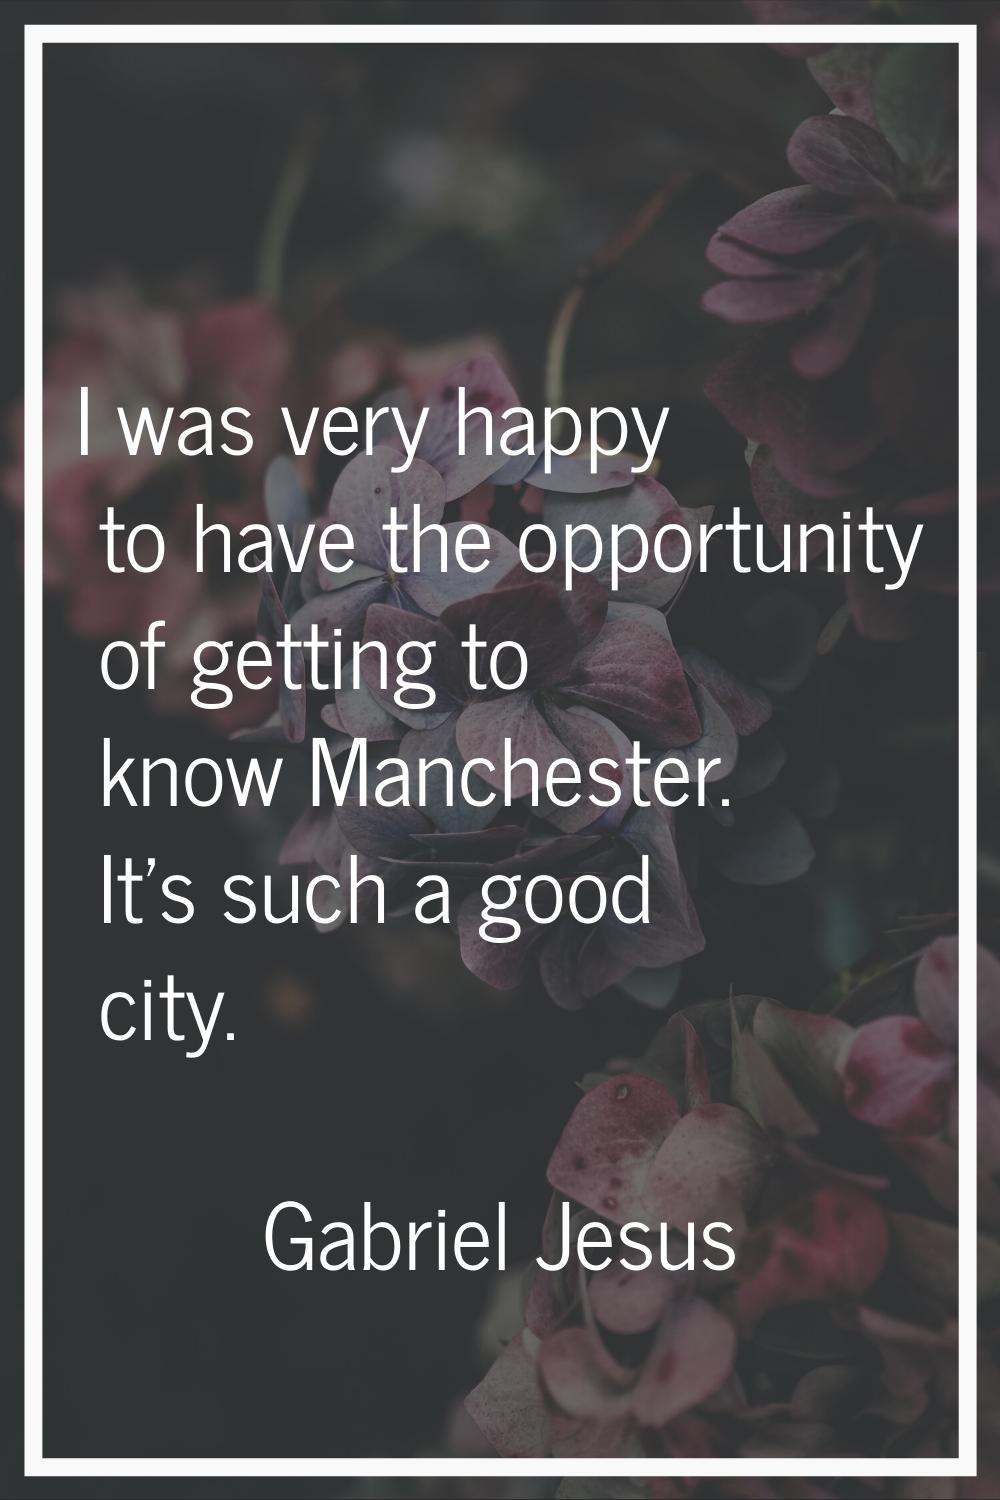 I was very happy to have the opportunity of getting to know Manchester. It's such a good city.